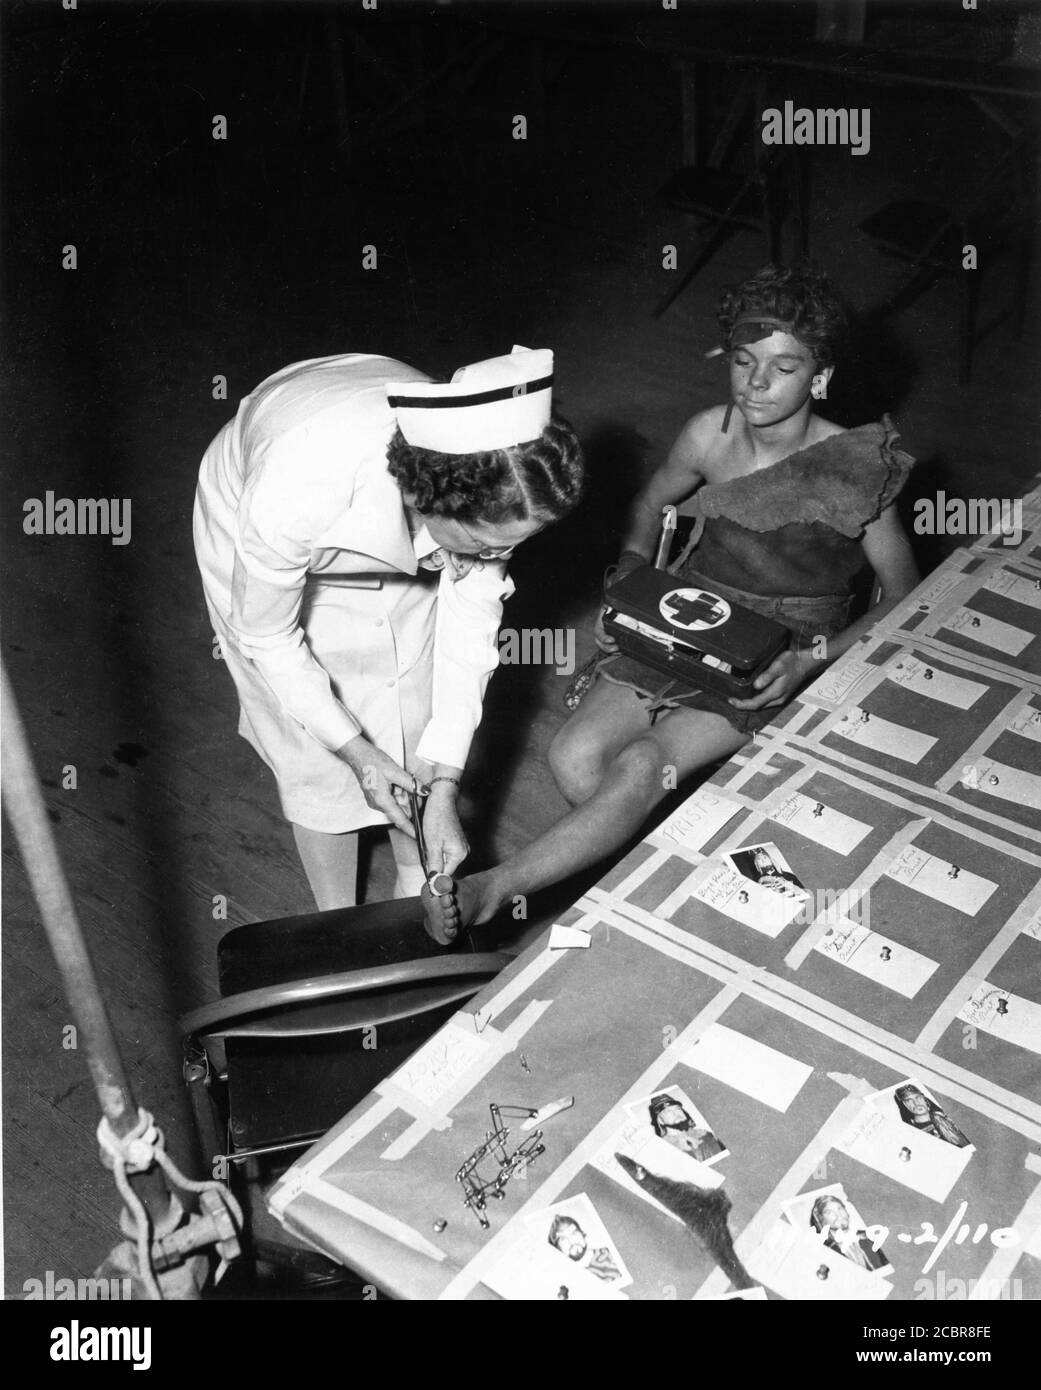 Young RUSS TAMBLYN in costume as Saul receives treatment for injured foot from Studio Nurse on set candid during filming of SAMSON AND DELILAH 1949 director CECIL B. DeMILLE Paramount Pictures Stock Photo